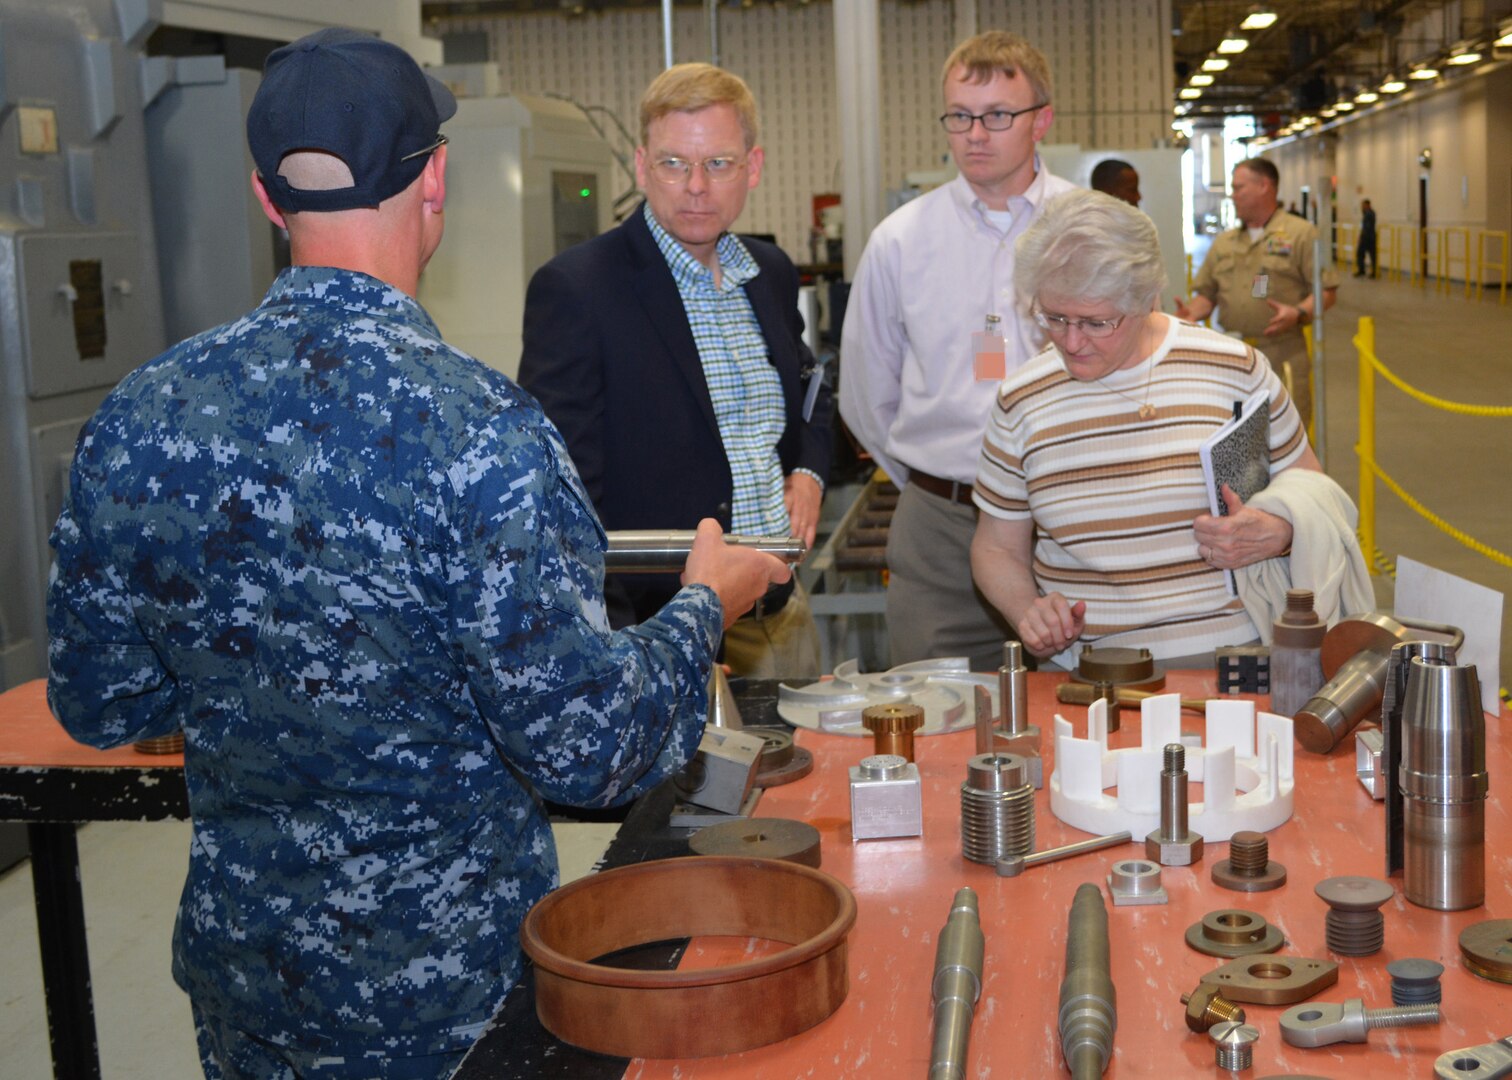 Chief Petty Officer Jason Broenneke shows examples of fabricated shipboard materiel created by Sailors at Southeast Regional Maintenance Center (SERMC) to (from L to R) Mr. Craig Collier and Ms. Vickie Plunkett who are professional staff members on the House Armed Services Committee. The staffers left with a better understanding regarding the different production lines, shops and labs present at SERMC. (Photo by Scott Curtis)